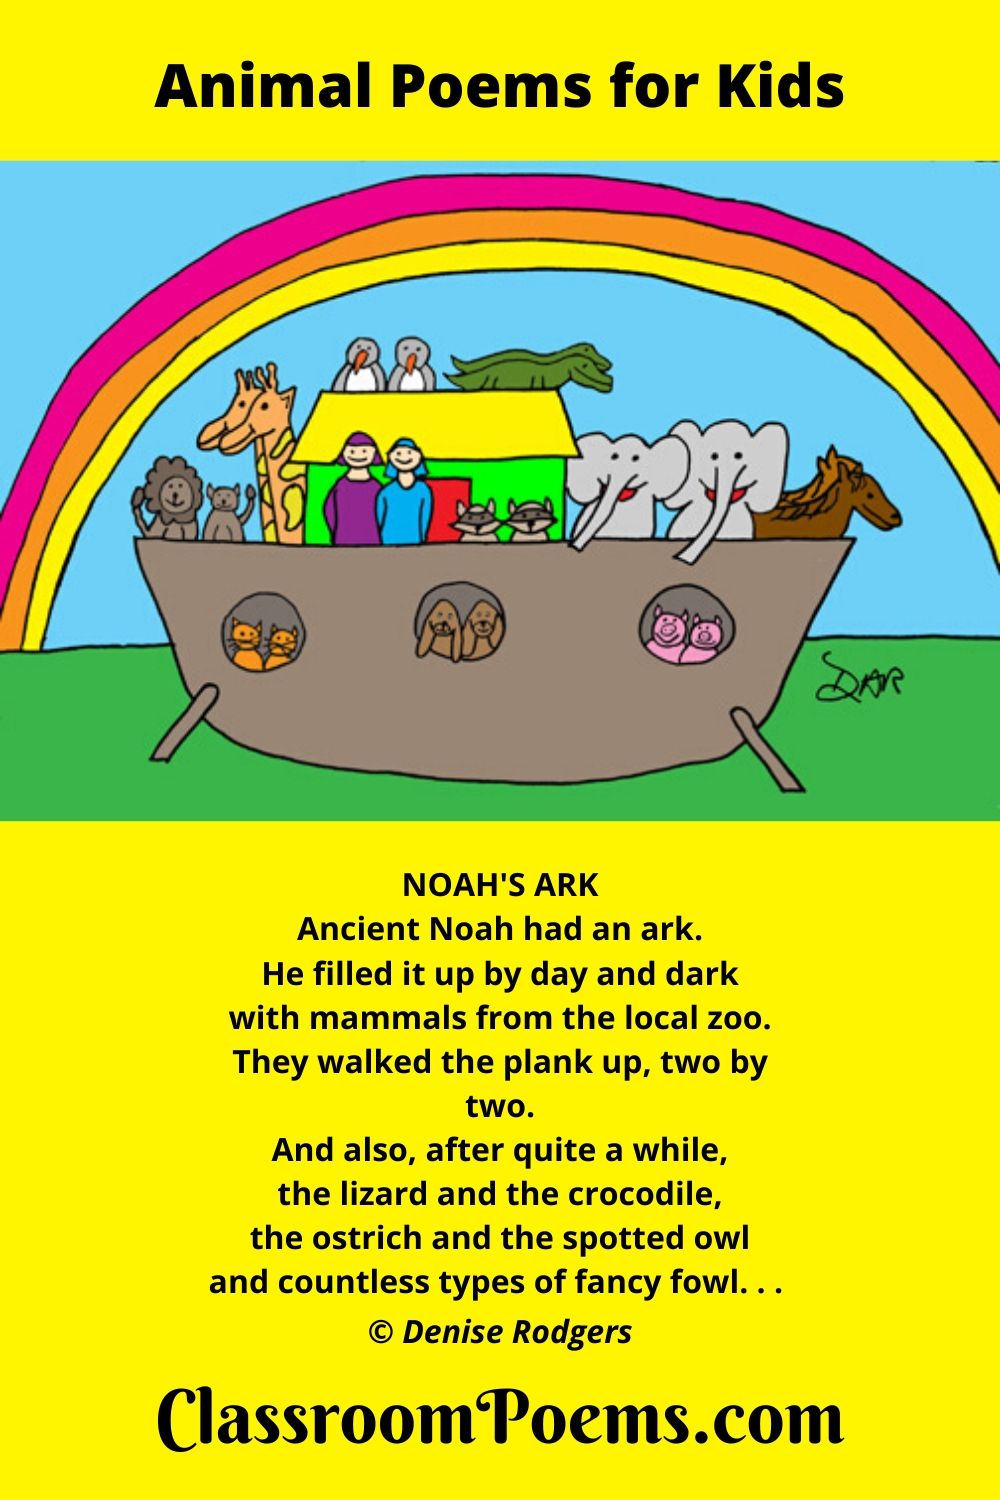 NOAH'S ARK poem for kids by Denise Rodgers on ClassroomPoems.com.